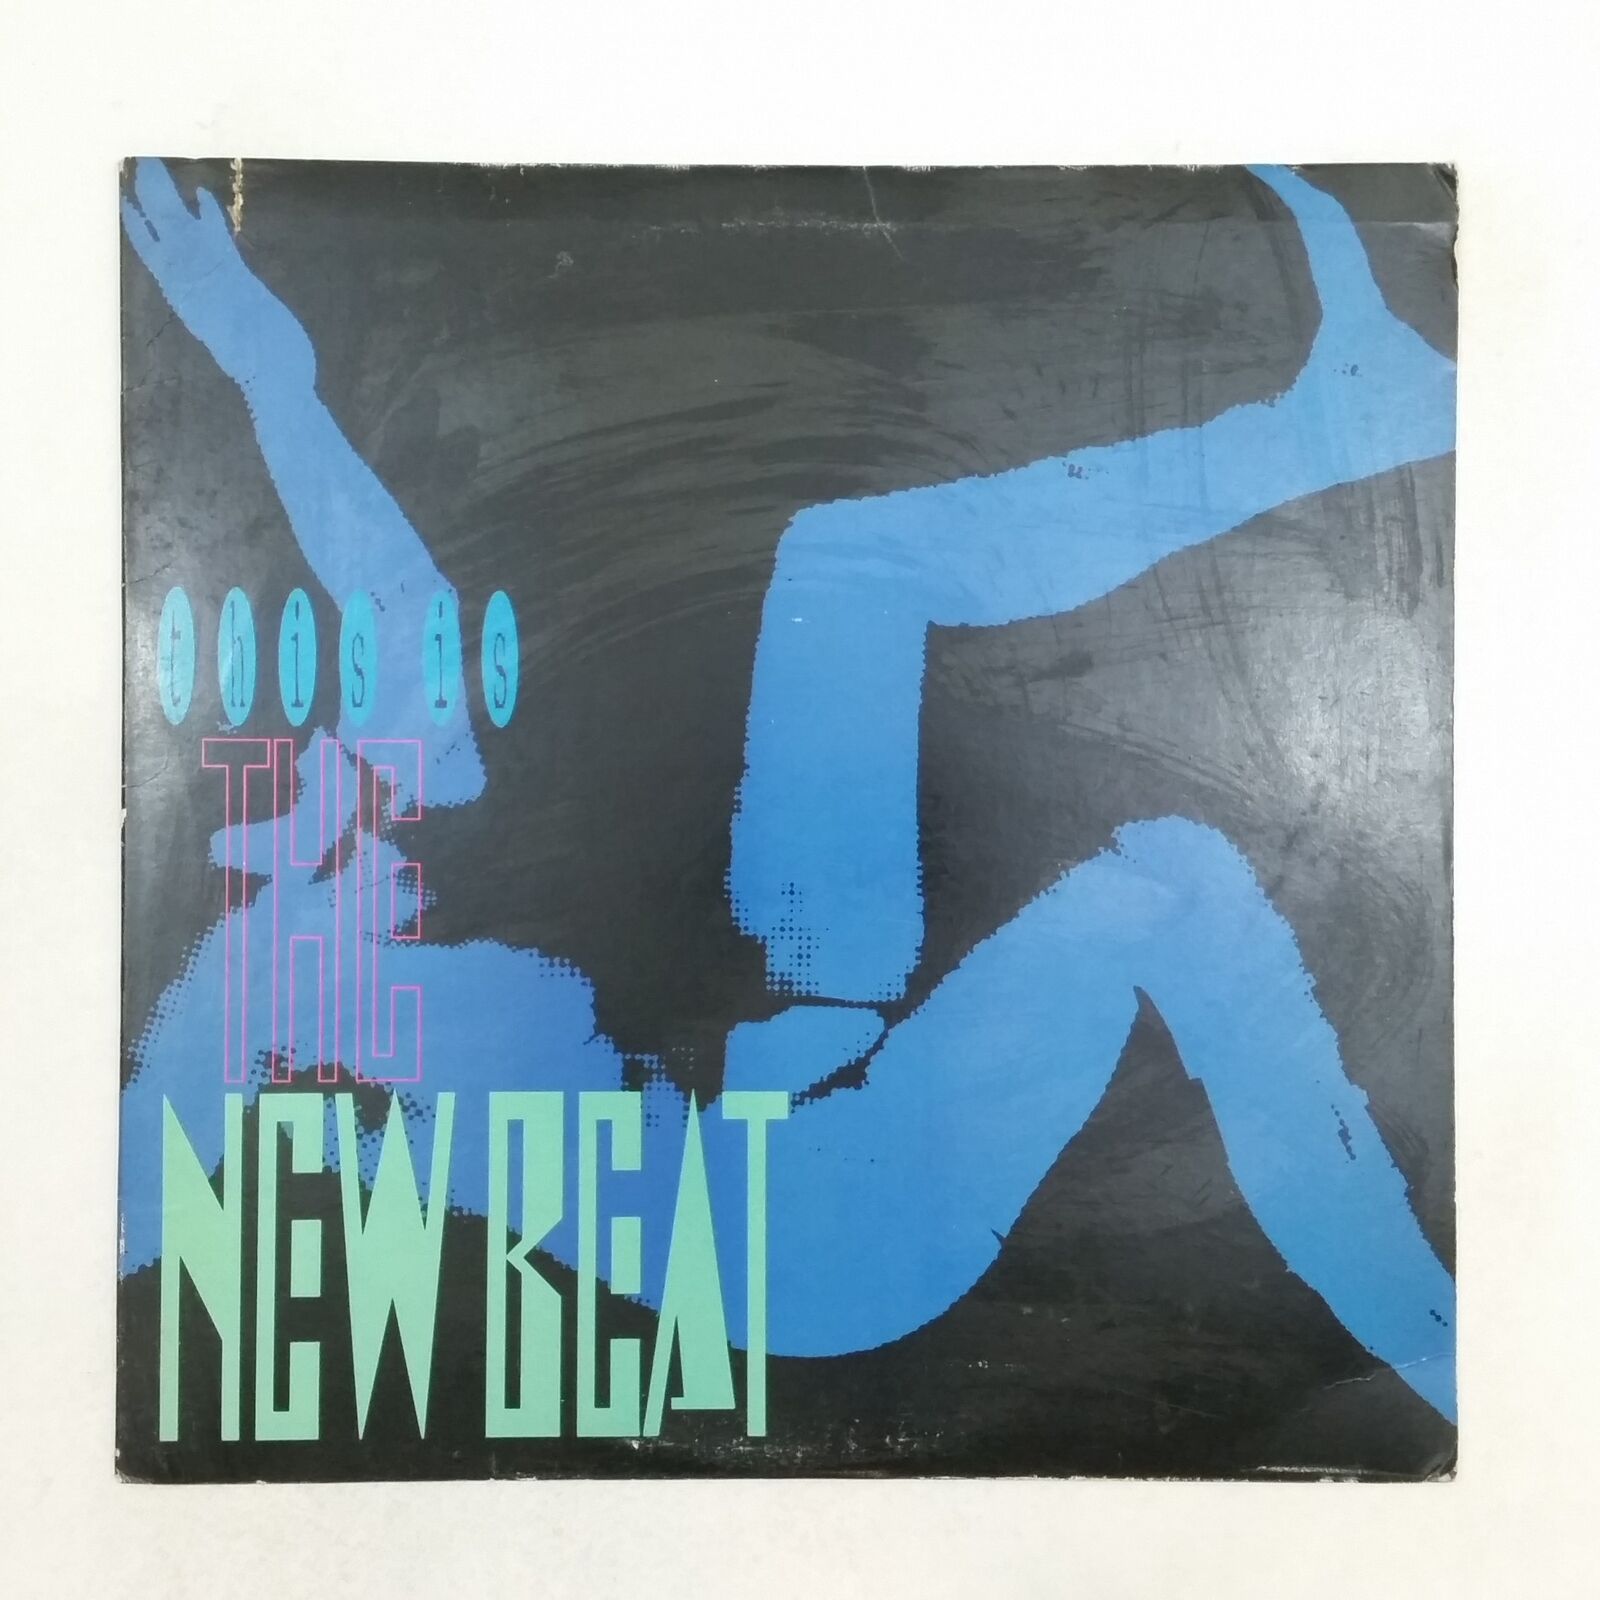 THIS IS THE NEW BEAT 4228415891Y1 LP Vinyl VG+nr++ Cover VG+ Electronic 1989